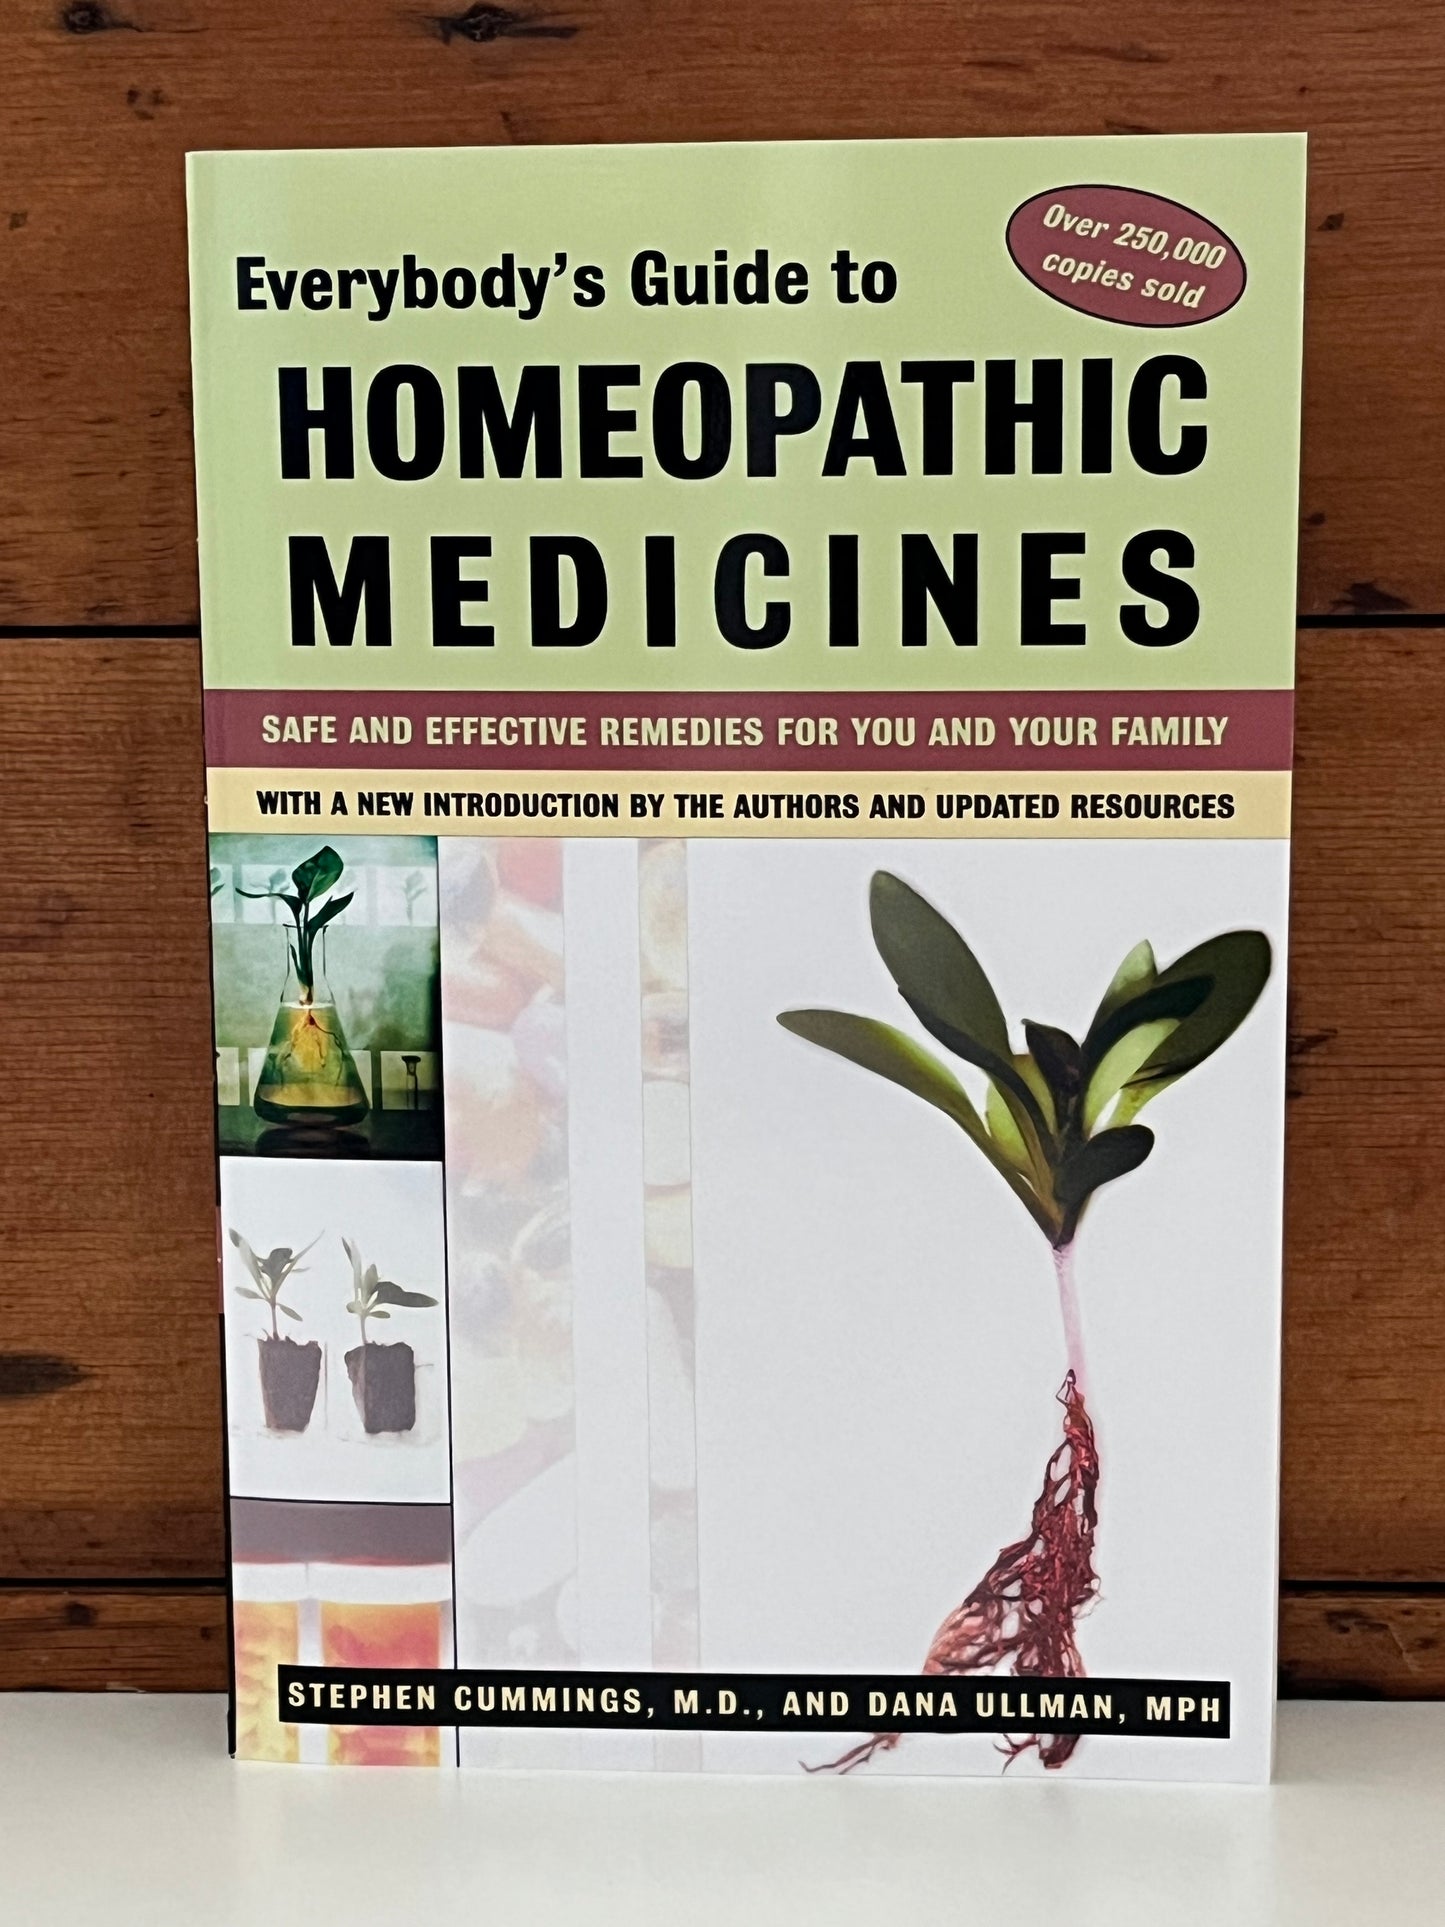 Parenting resource - EVERYBODY’S GUIDE TO HOMEOPATHIC MEDICINES